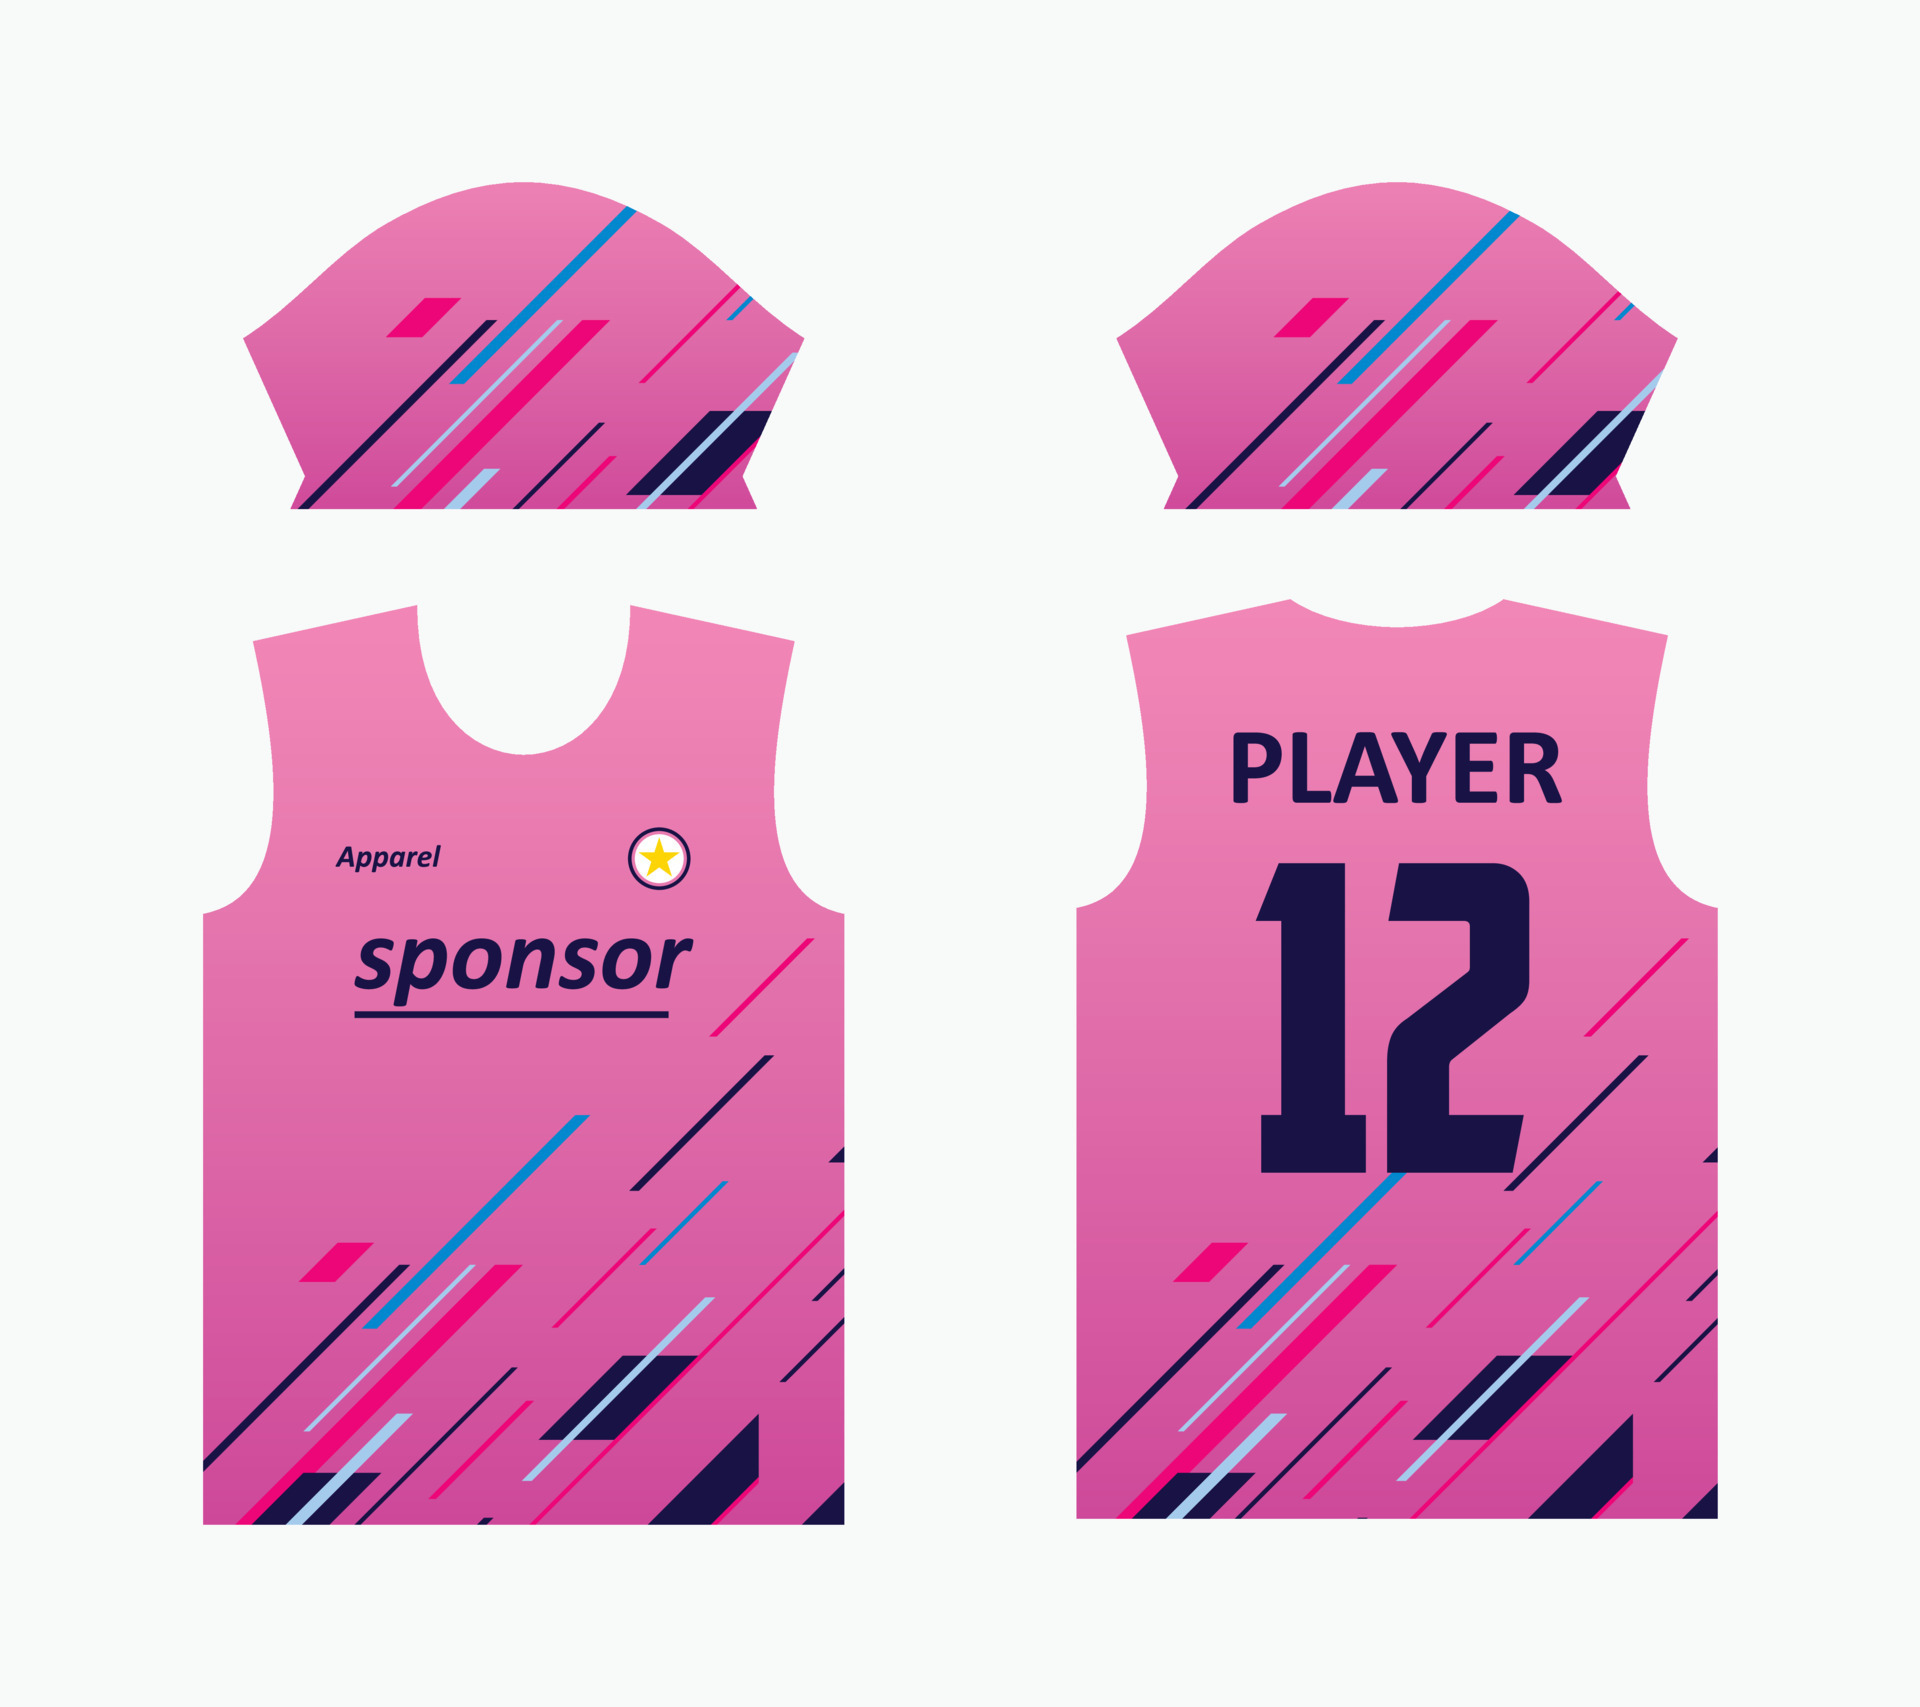 Team Jersey designs, themes, templates and downloadable graphic